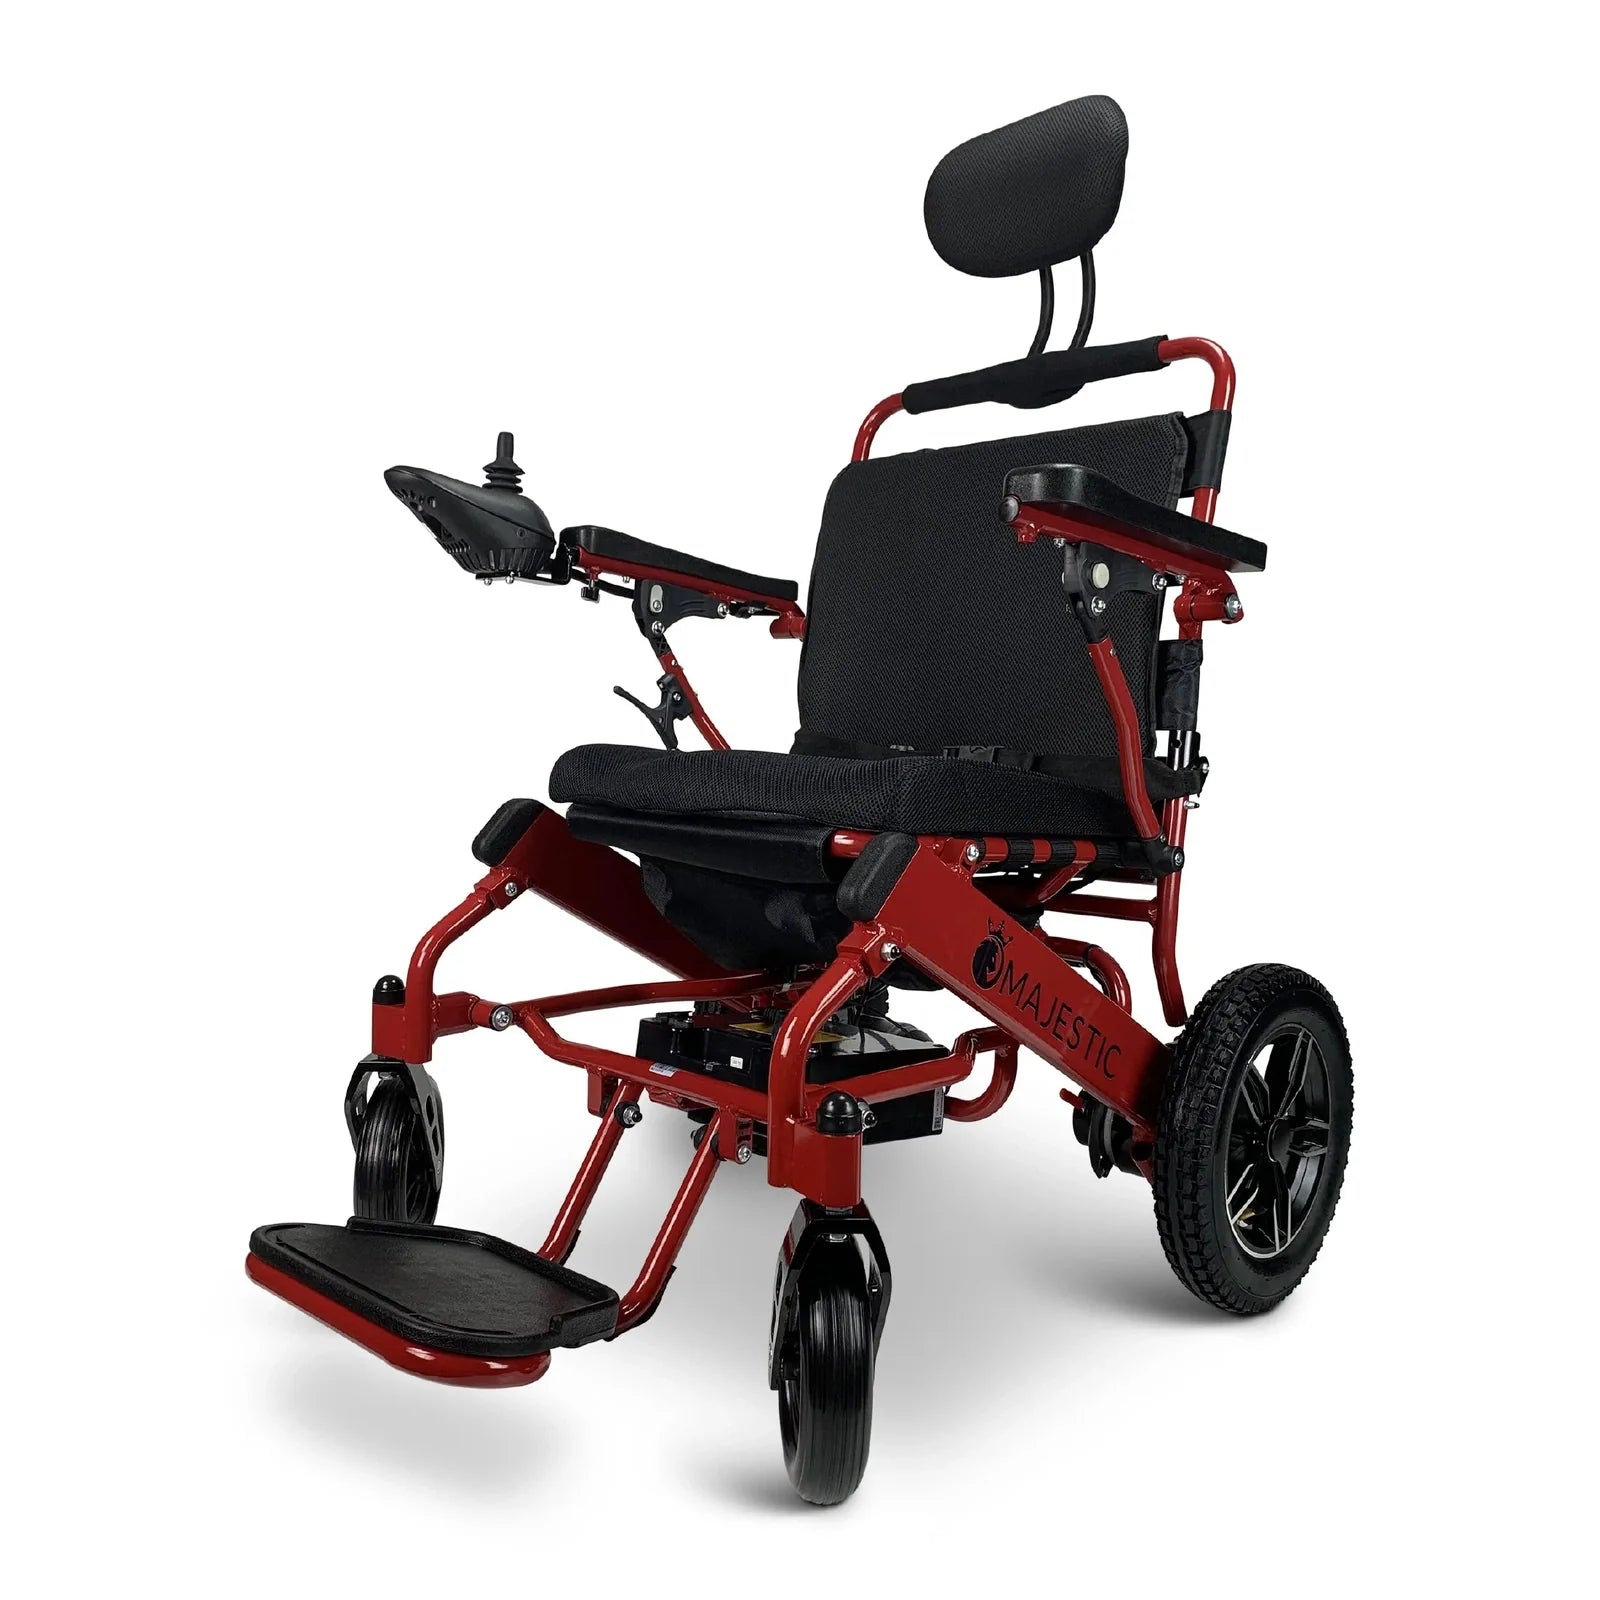 ComfyGO Majestic IQ-8000 Remote Controlled Lightweight Folding Electric Wheelchair Power Wheelchairs ComfyGO Red Standard 10 Miles & 17.5" Seat Width